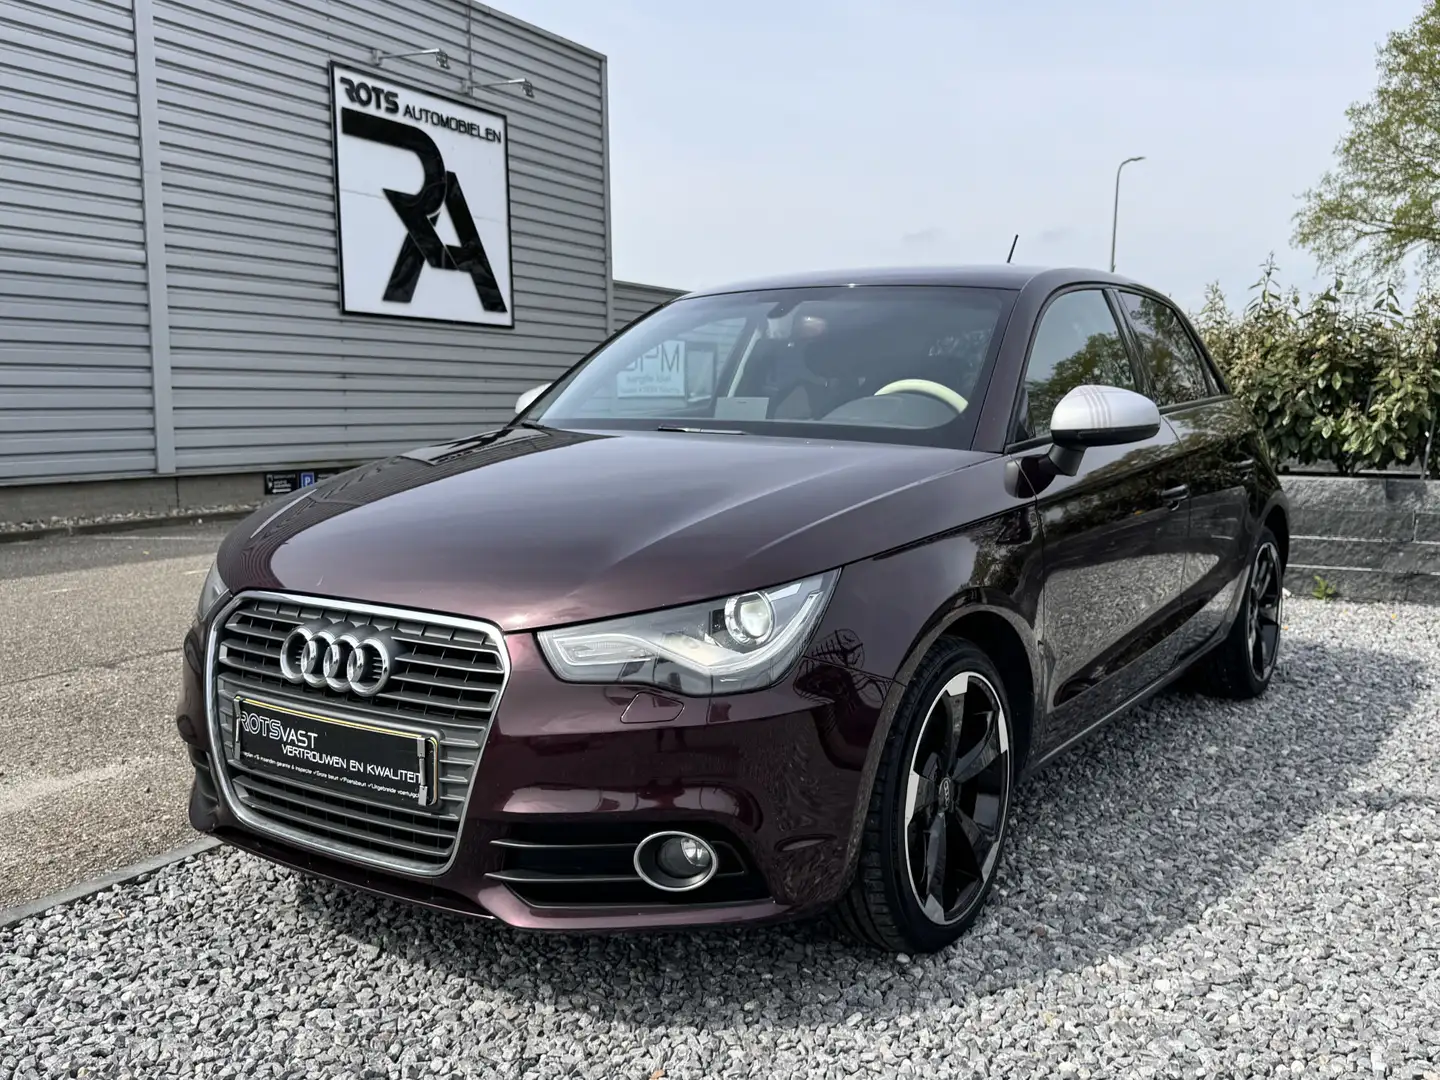 Audi A1 Sportback 1.4 TFSI Speciale uitvoering! Paars Pare Lilla - 2